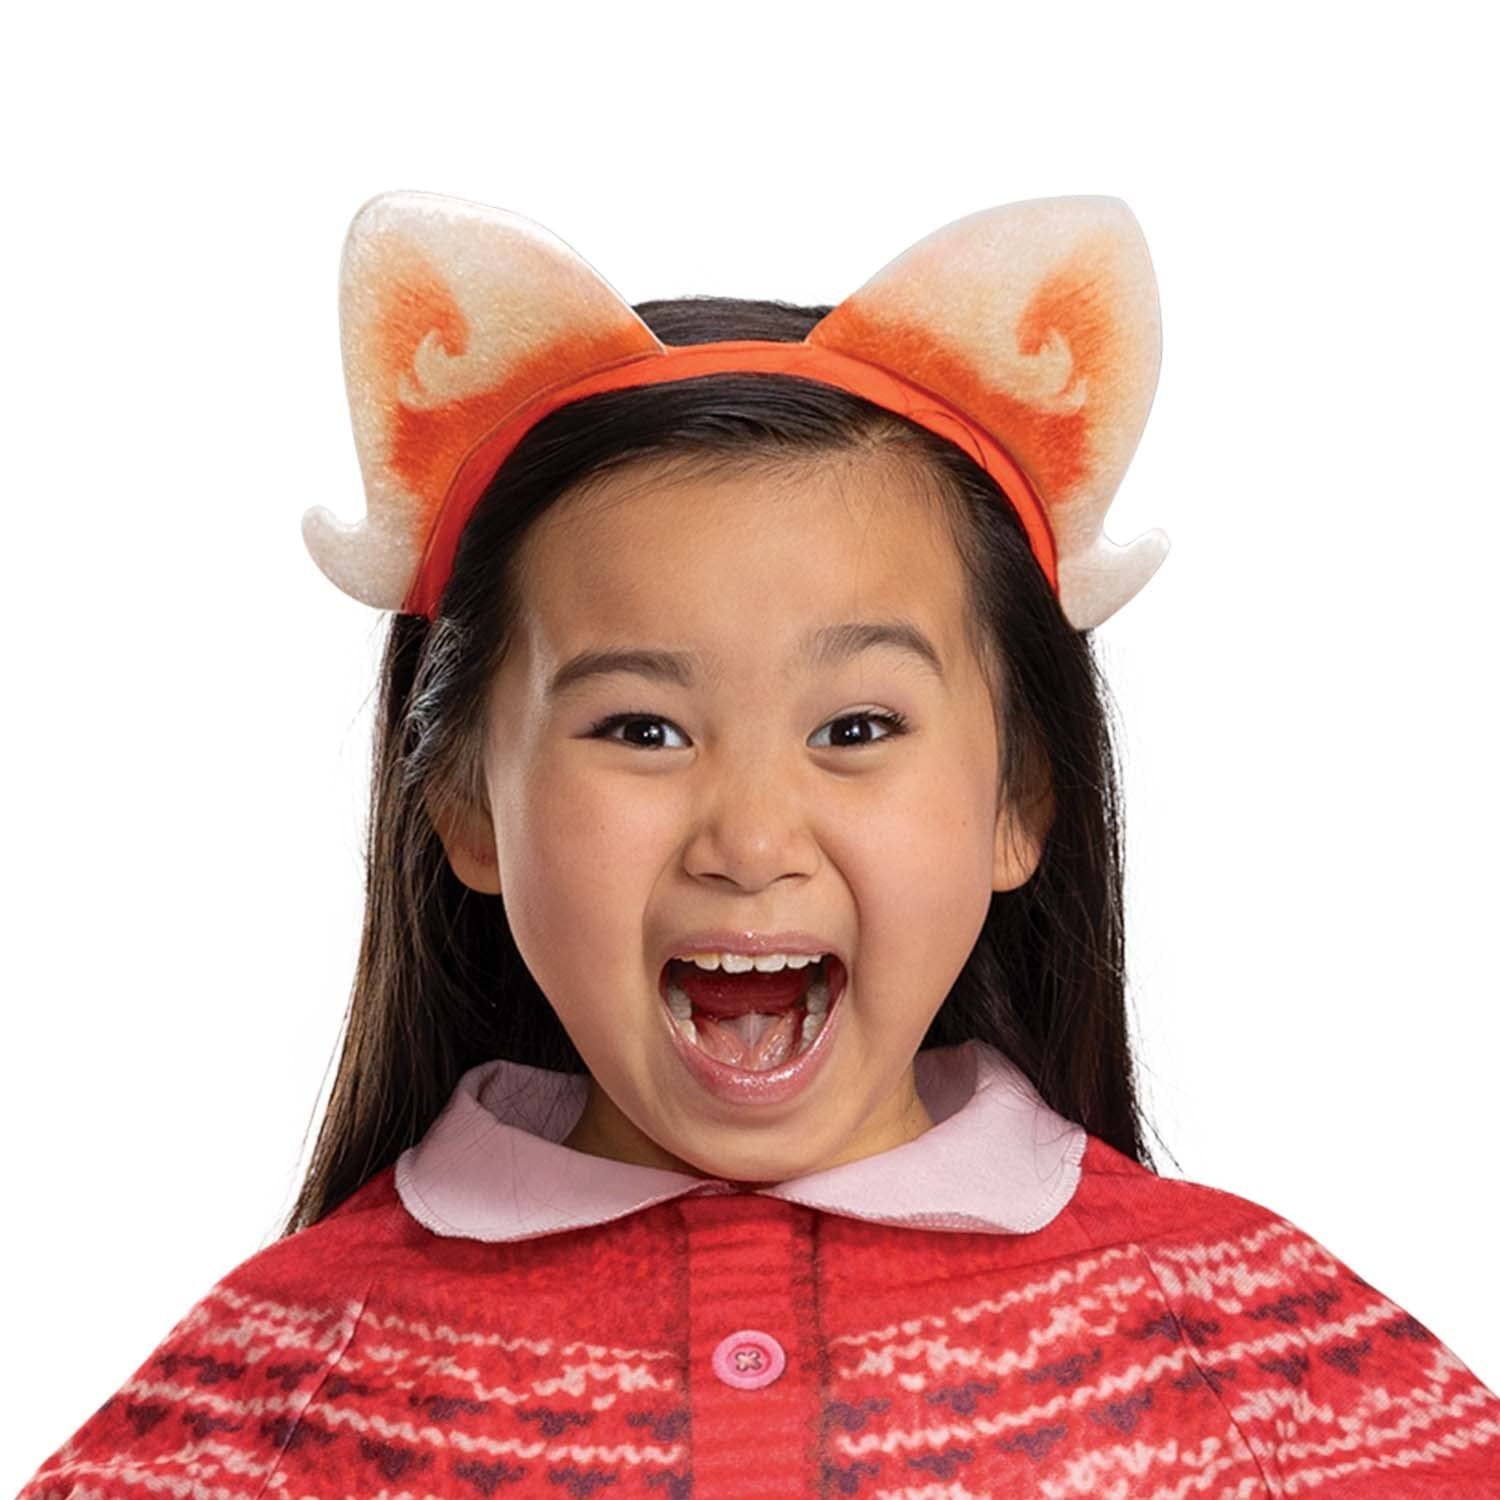 Disguise Mei Costume for Kids Medium (7-8) Turning Red with Panda Ears Headband As Shown